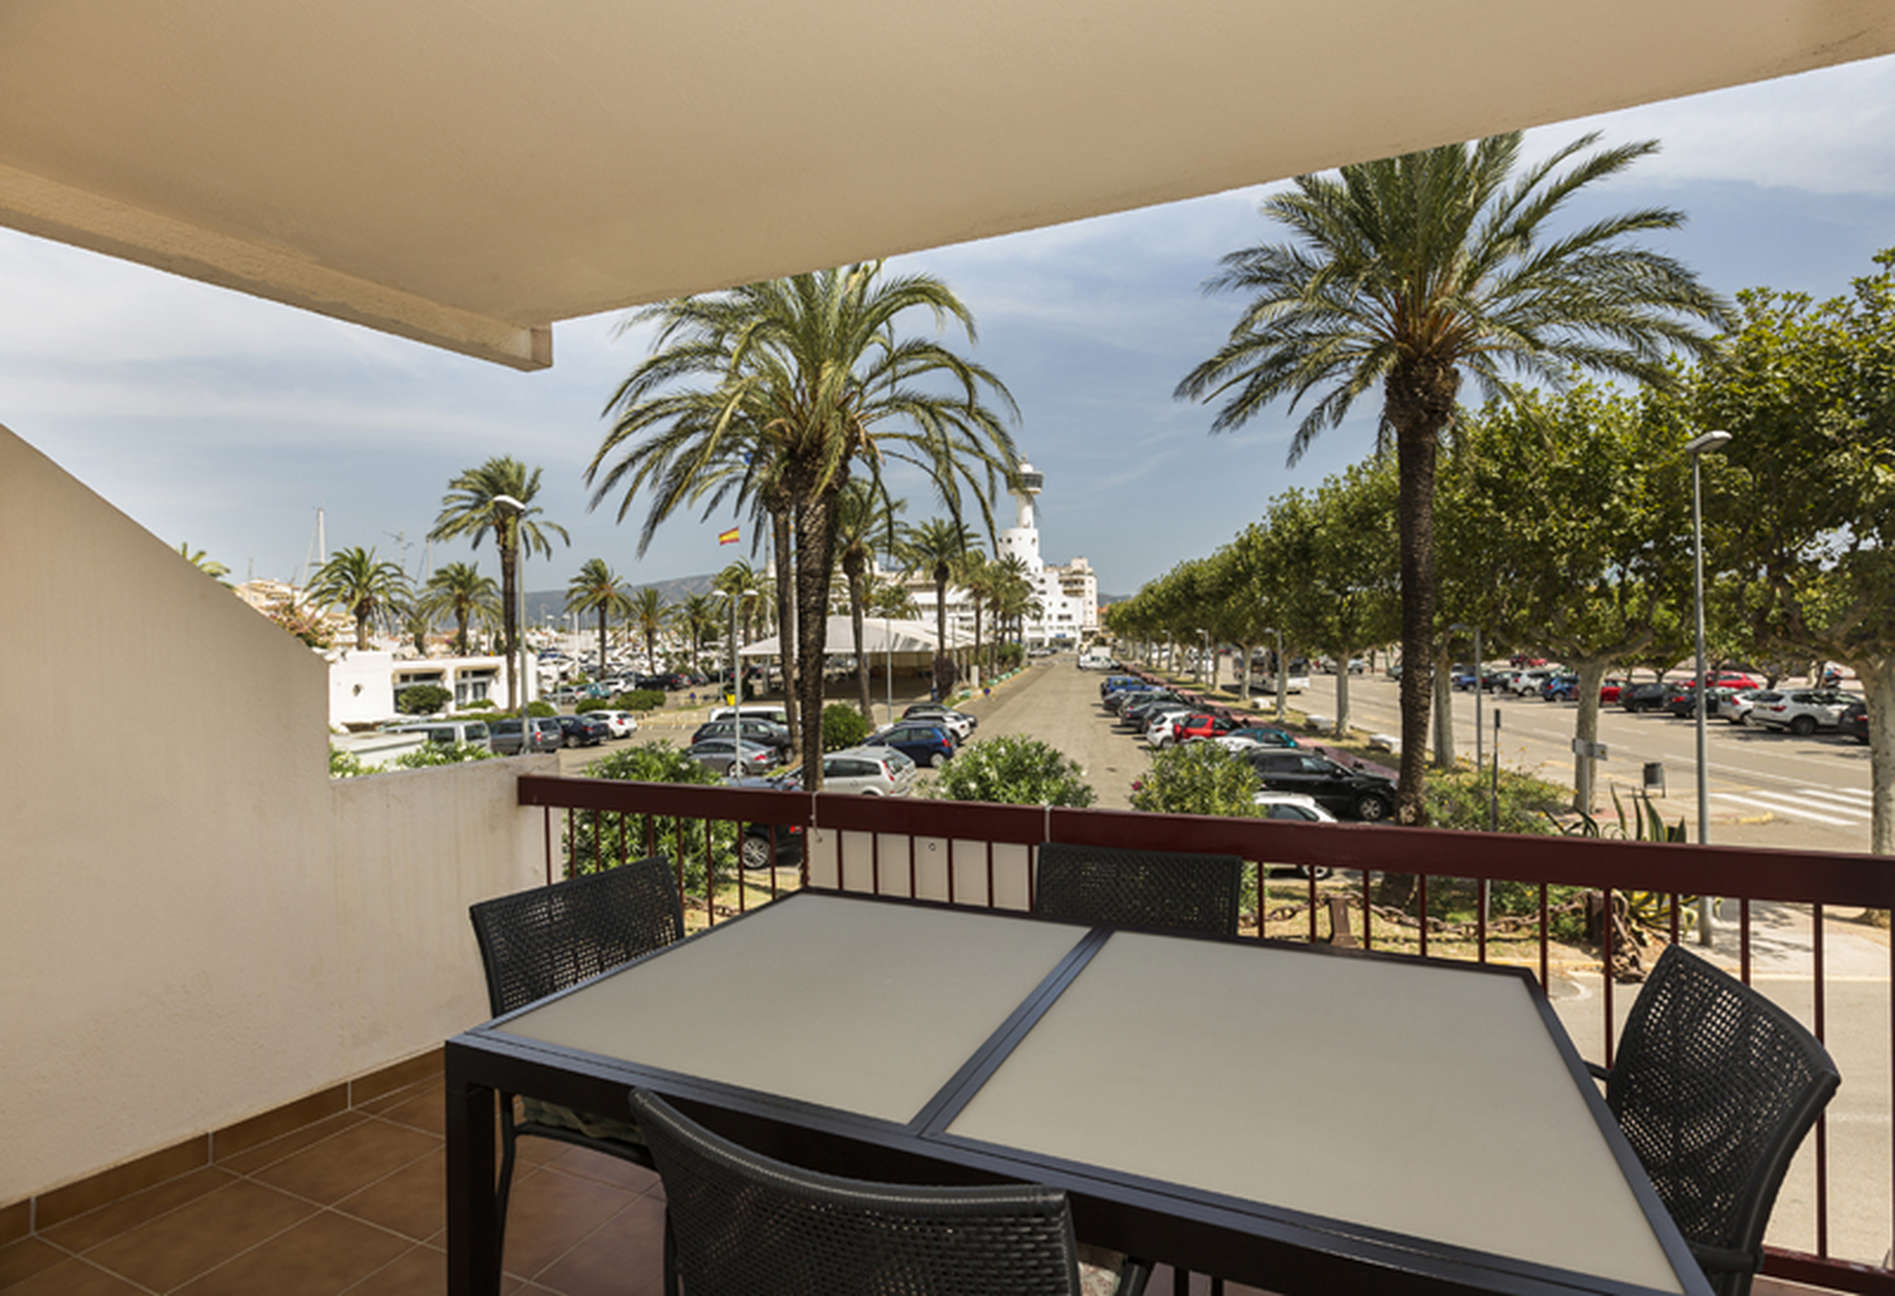 Modern 2 bedroom Appartment situated in the harbour of Empuriabrava.  